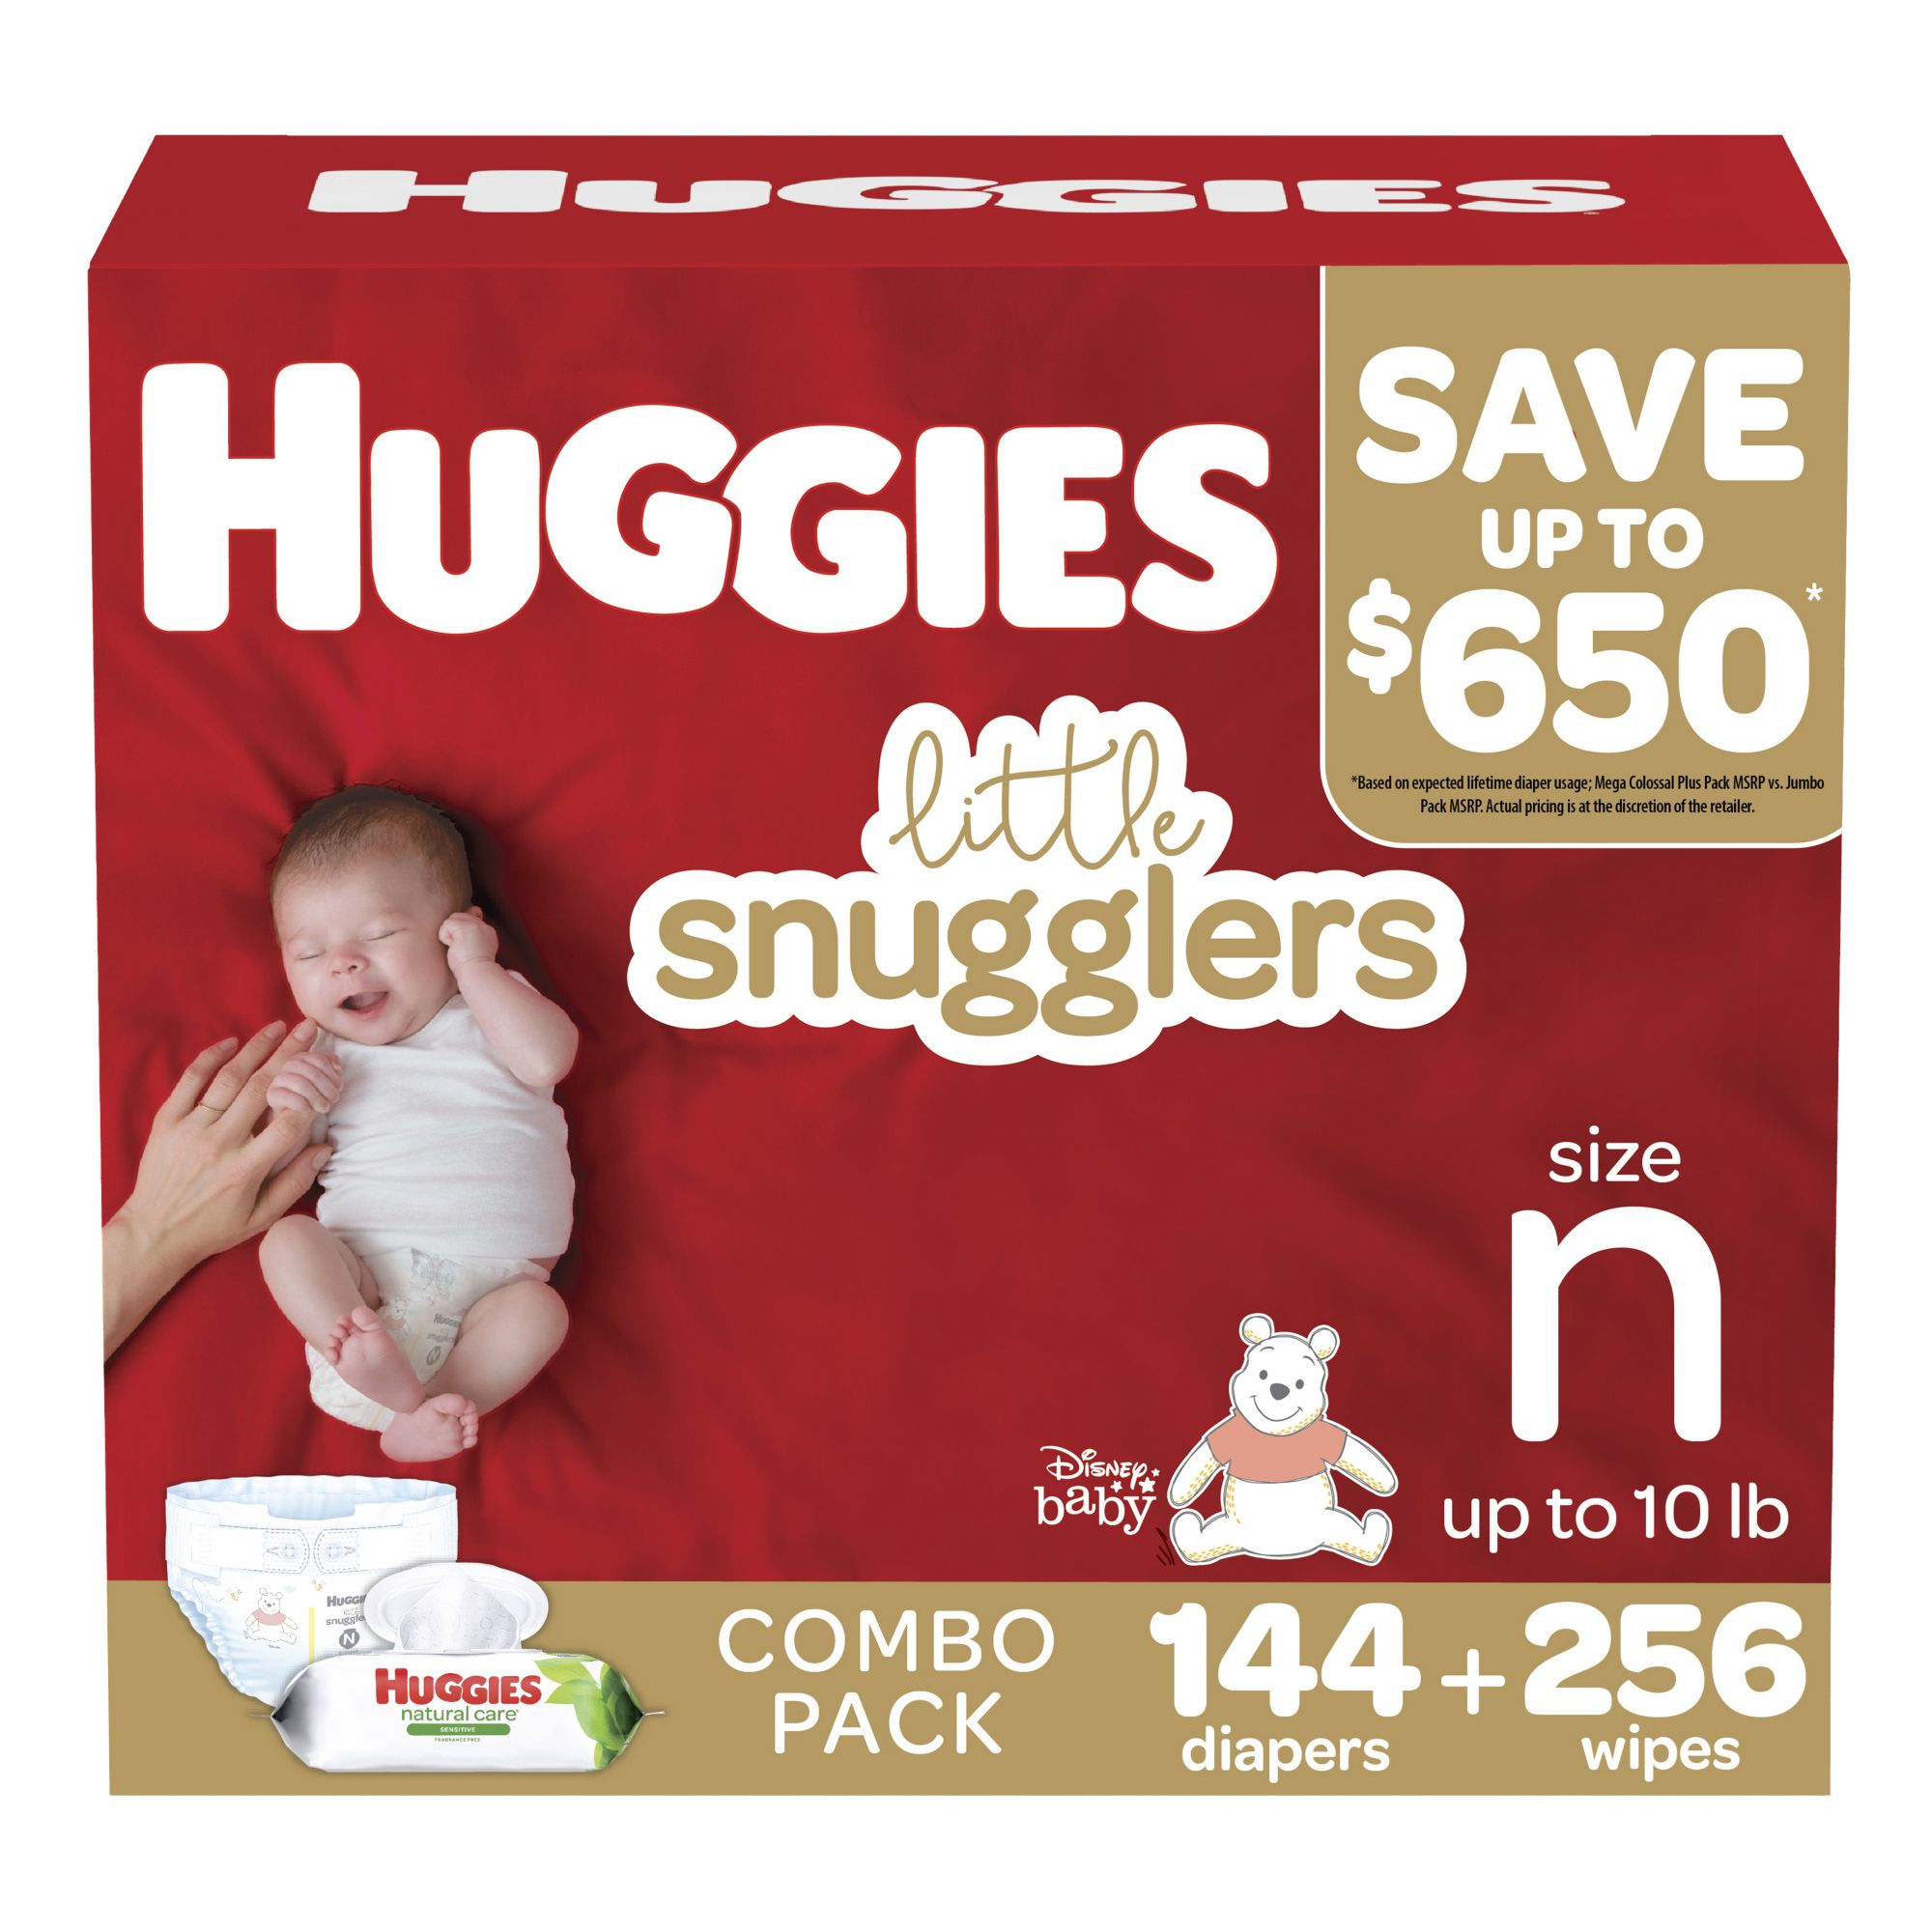 Huggies Little Snugglers Diapers Size 1 198 ct